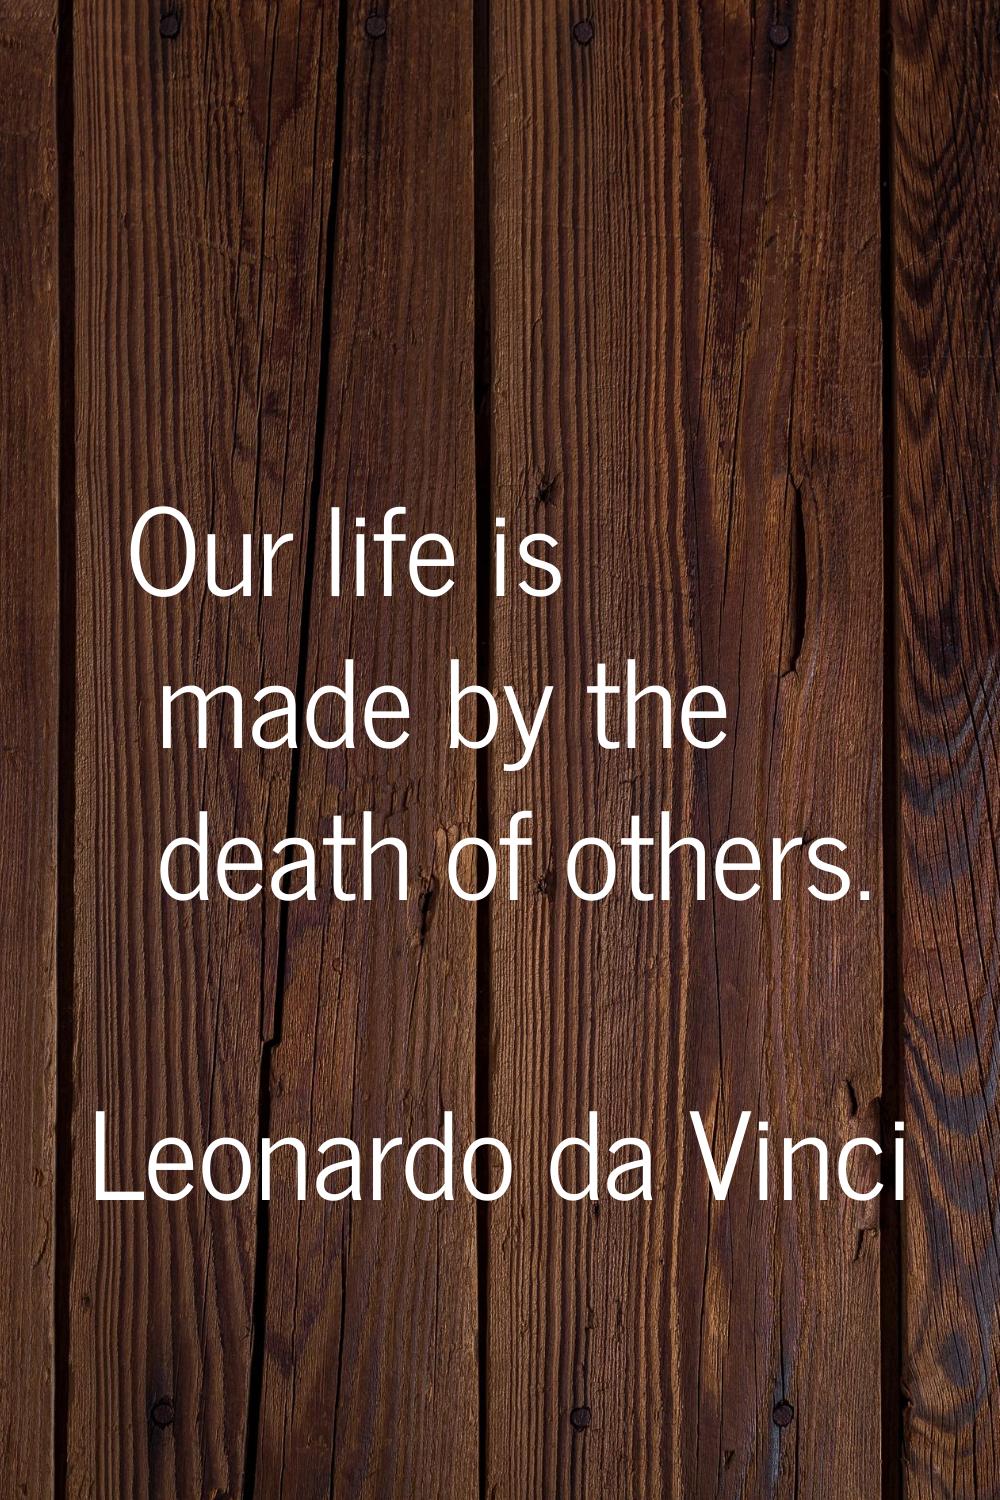 Our life is made by the death of others.